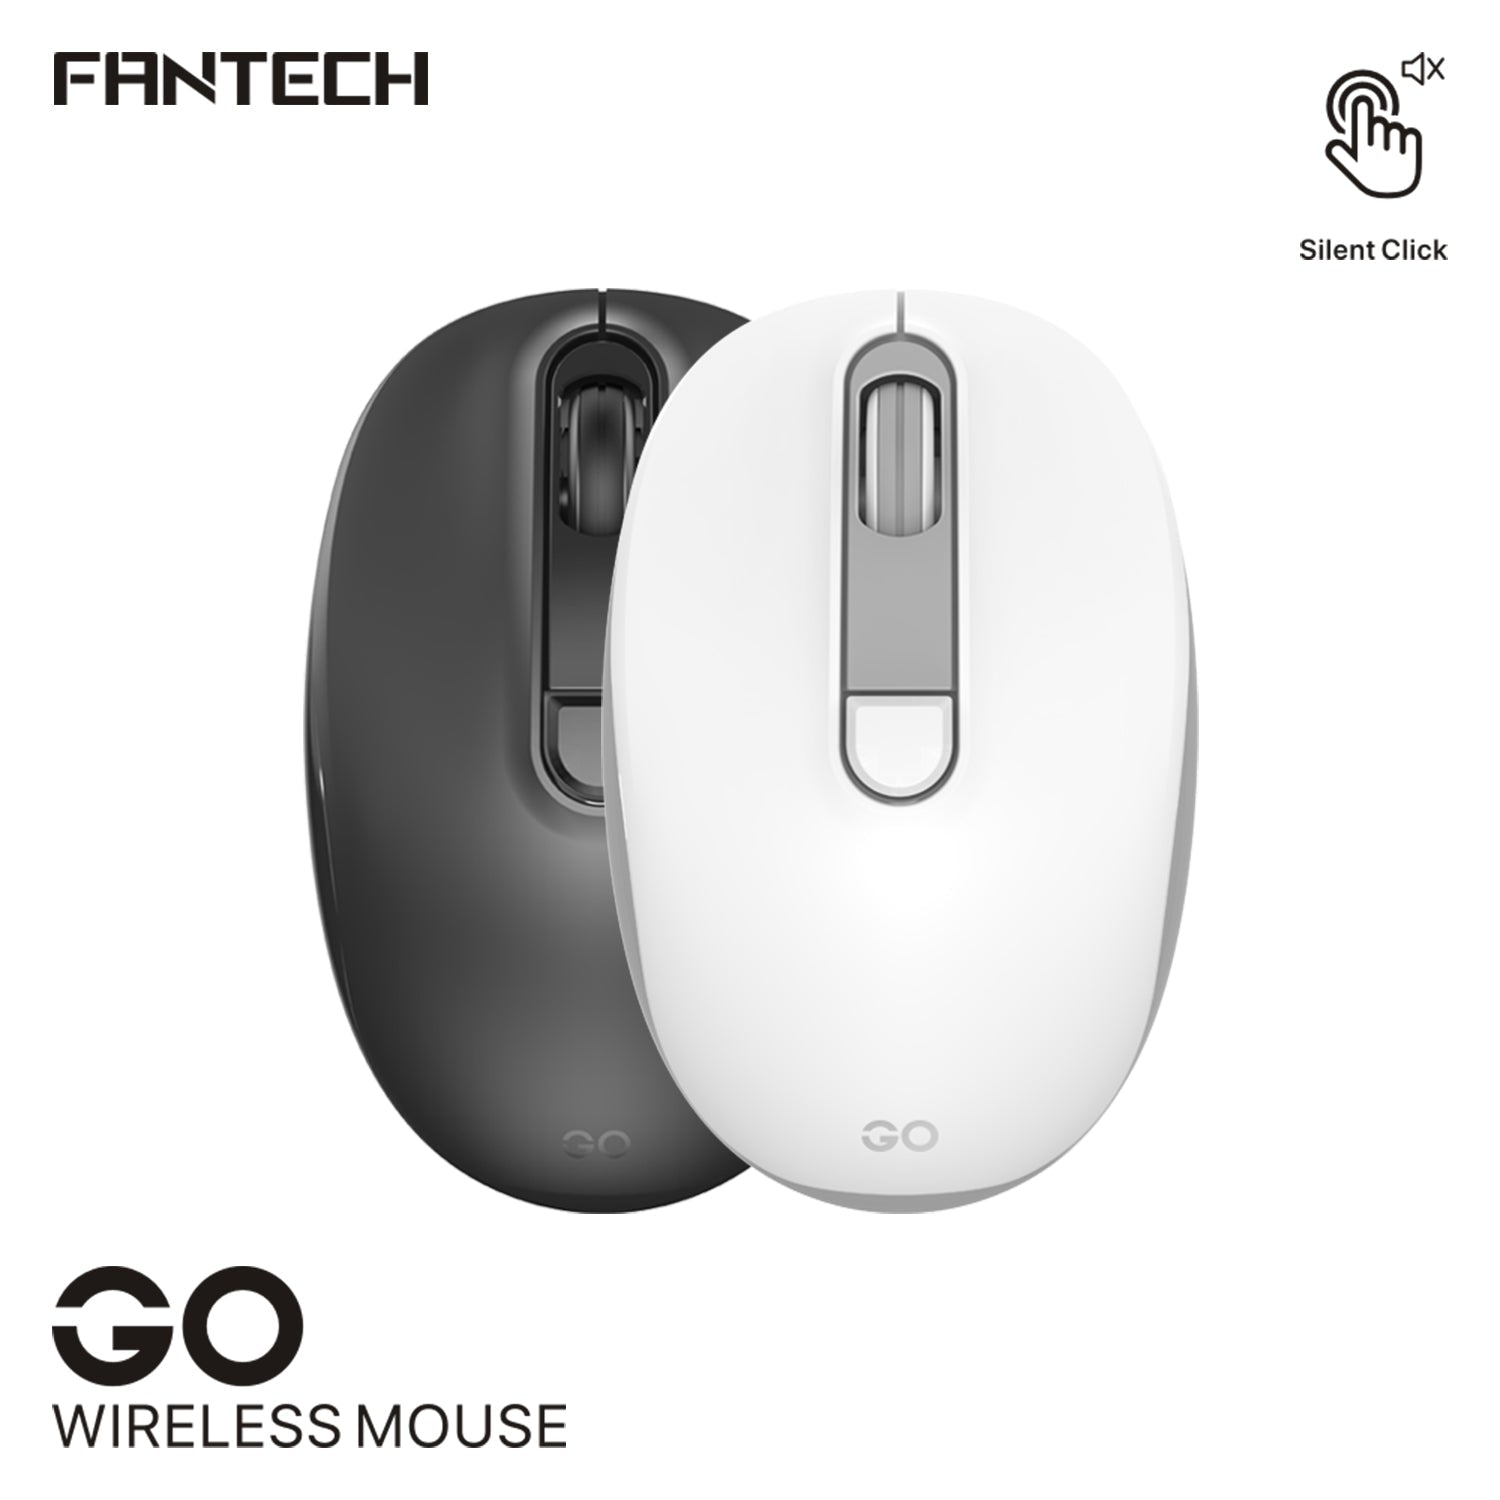 Fantech W192 GOWireless Mouse with Silent Click JOD 8